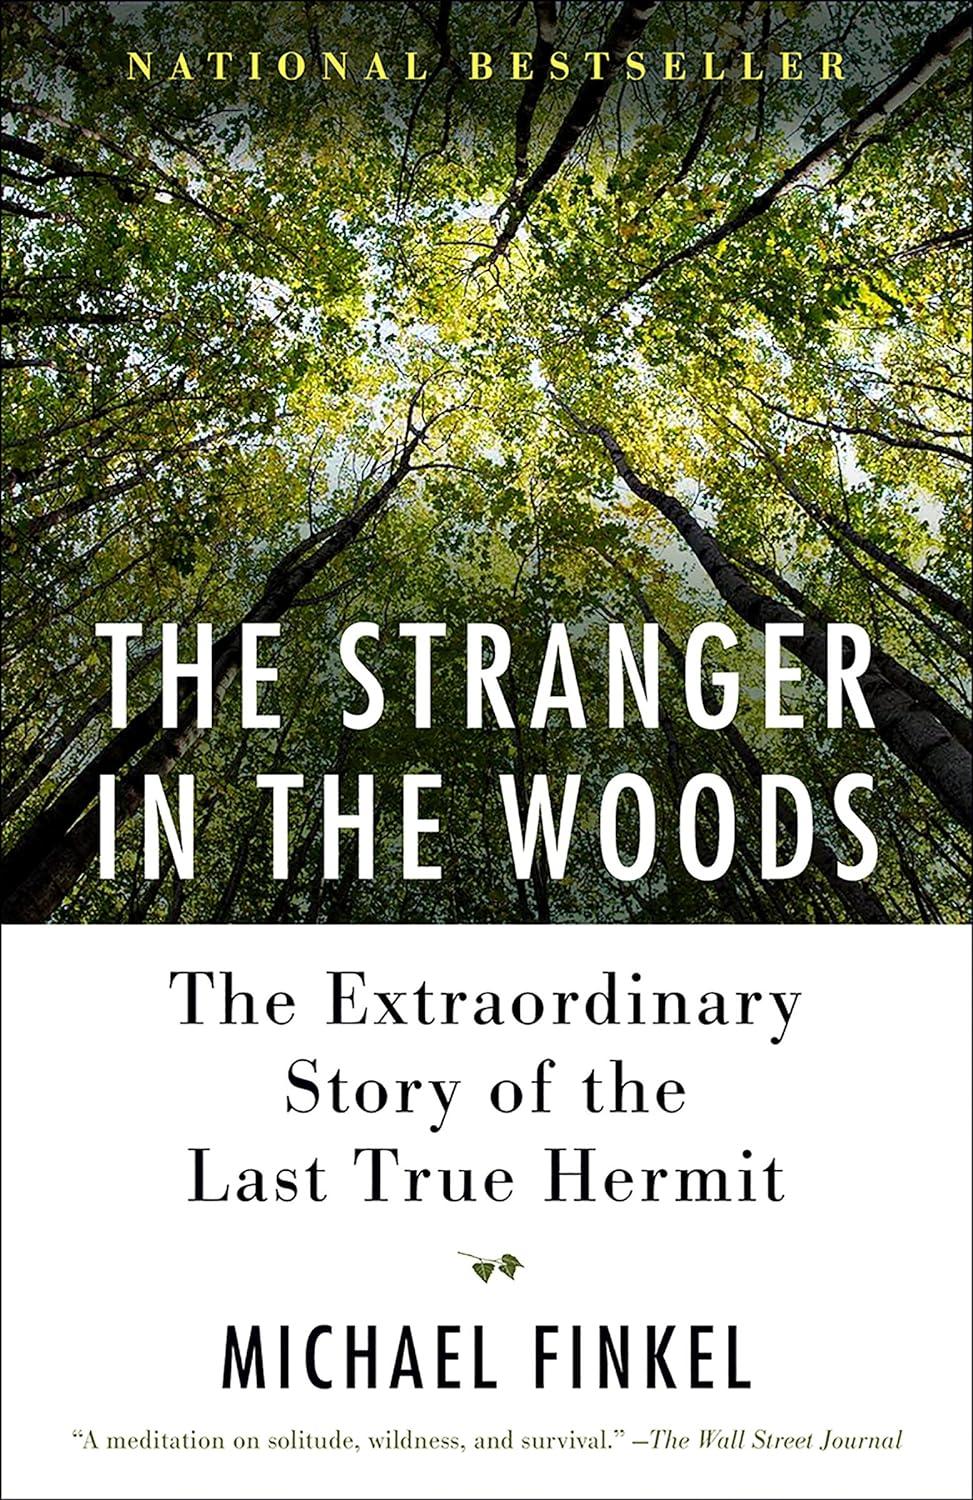 The Stranger in the Woods: The Extraordinary Story of the Last True Hermit literary analysis